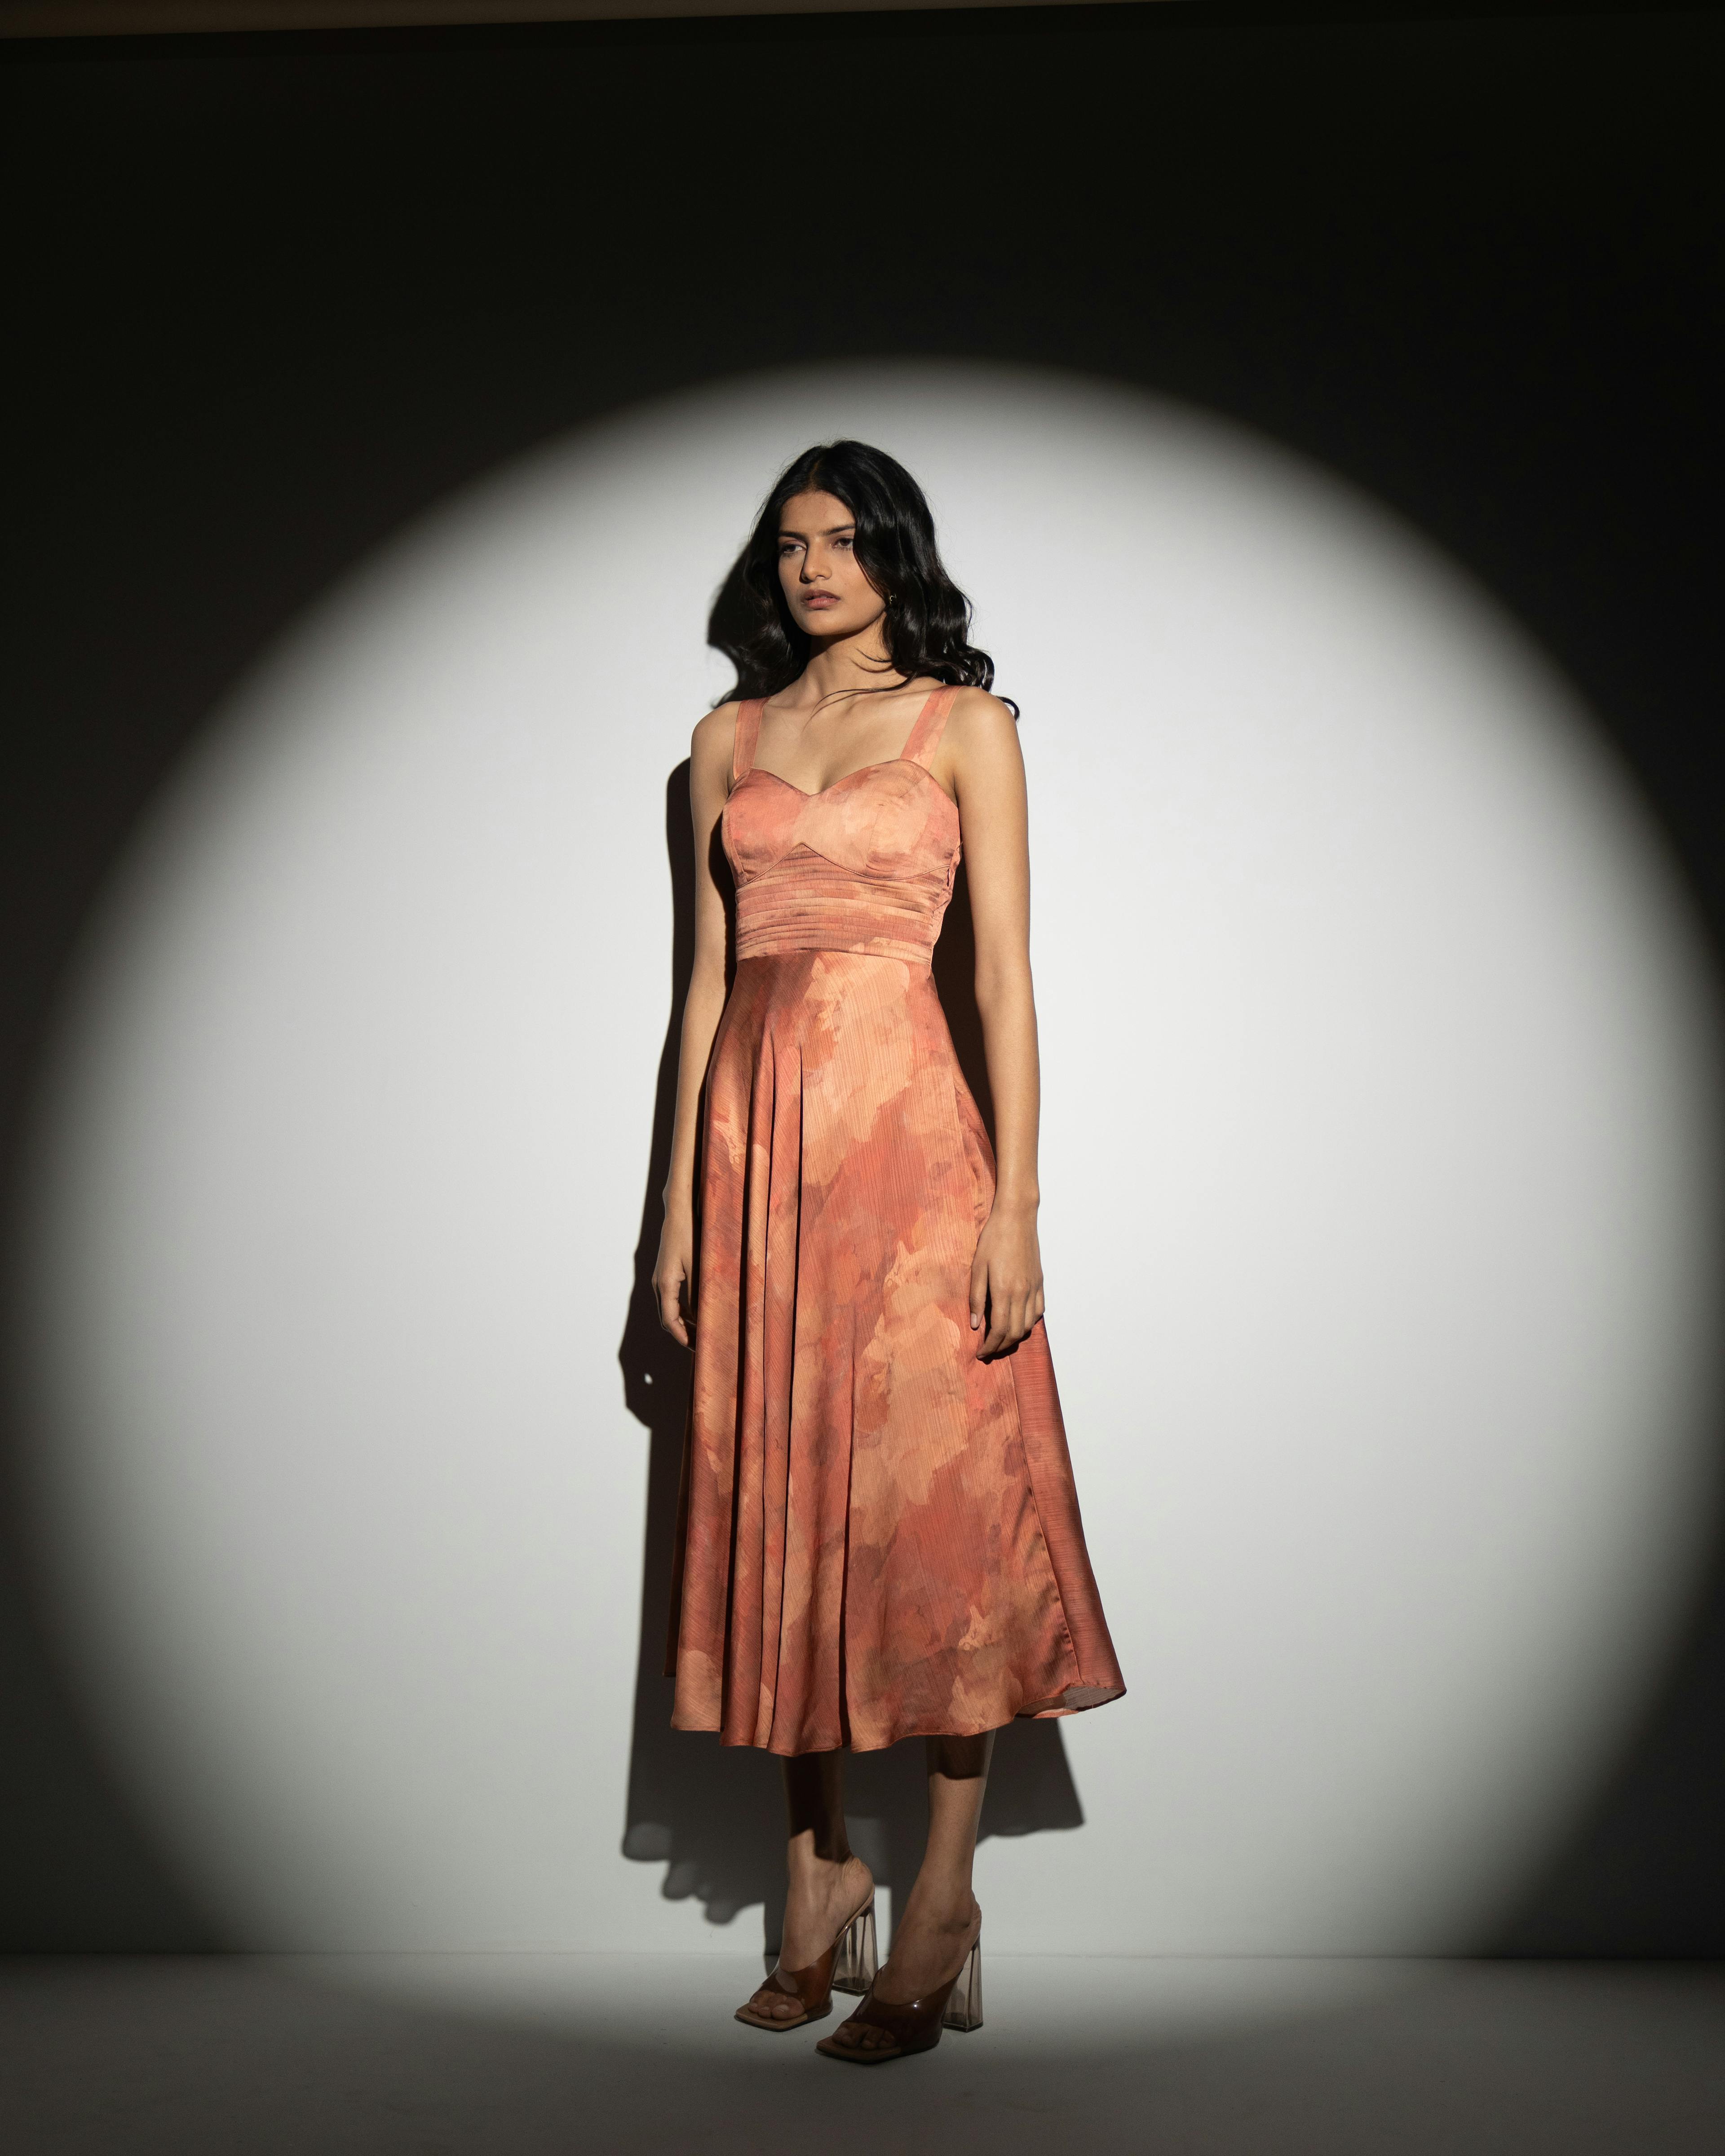 Sunset Dress, a product by Concept Kapda